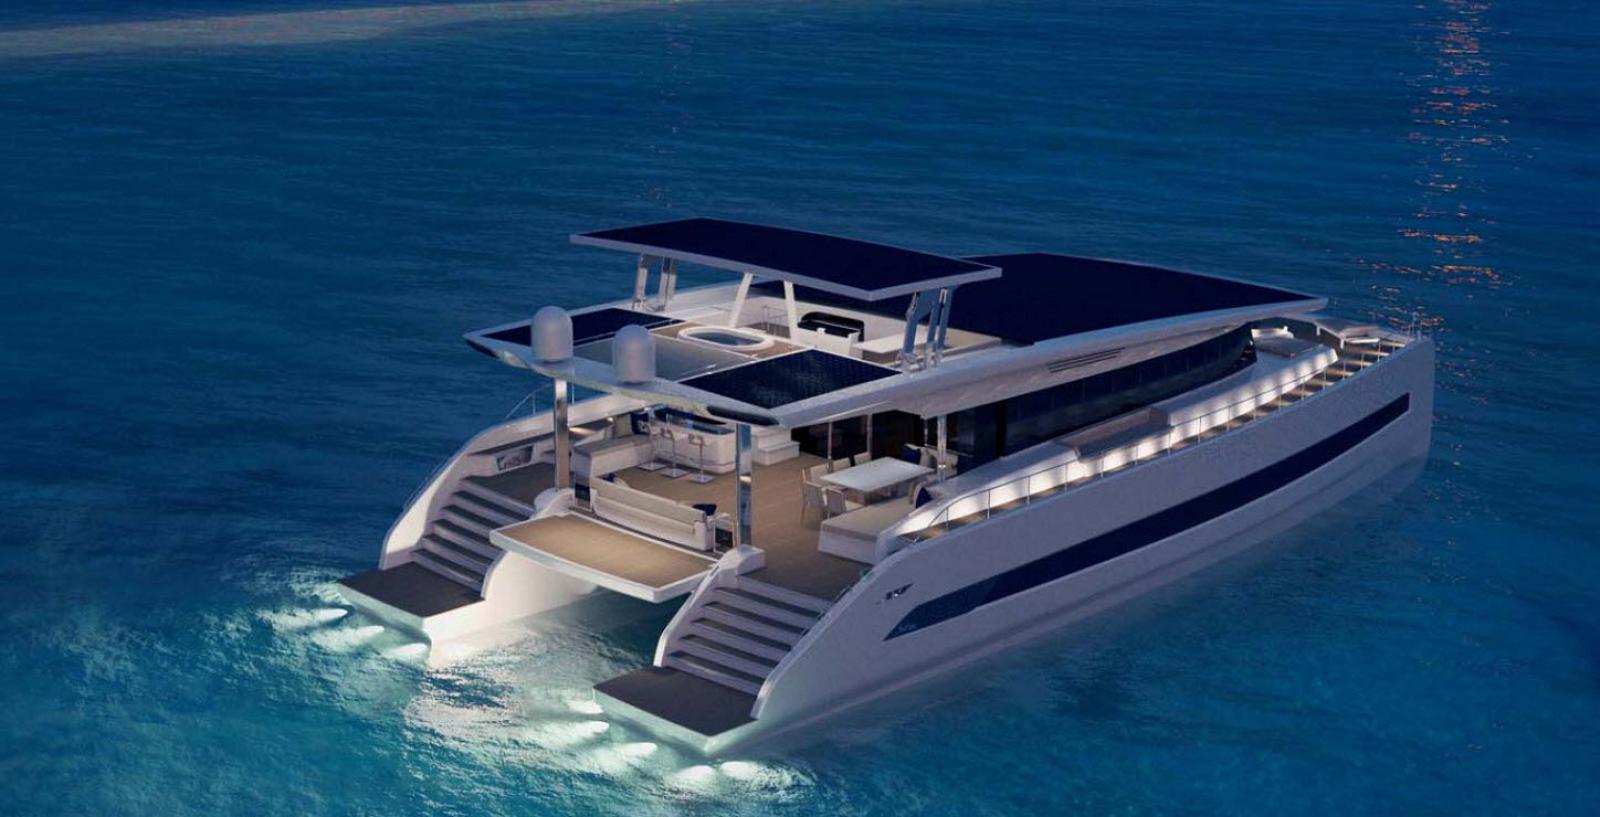 photo of What Is Everyone Saying About Silent Yachts Being 100 Percent Solar Powered?